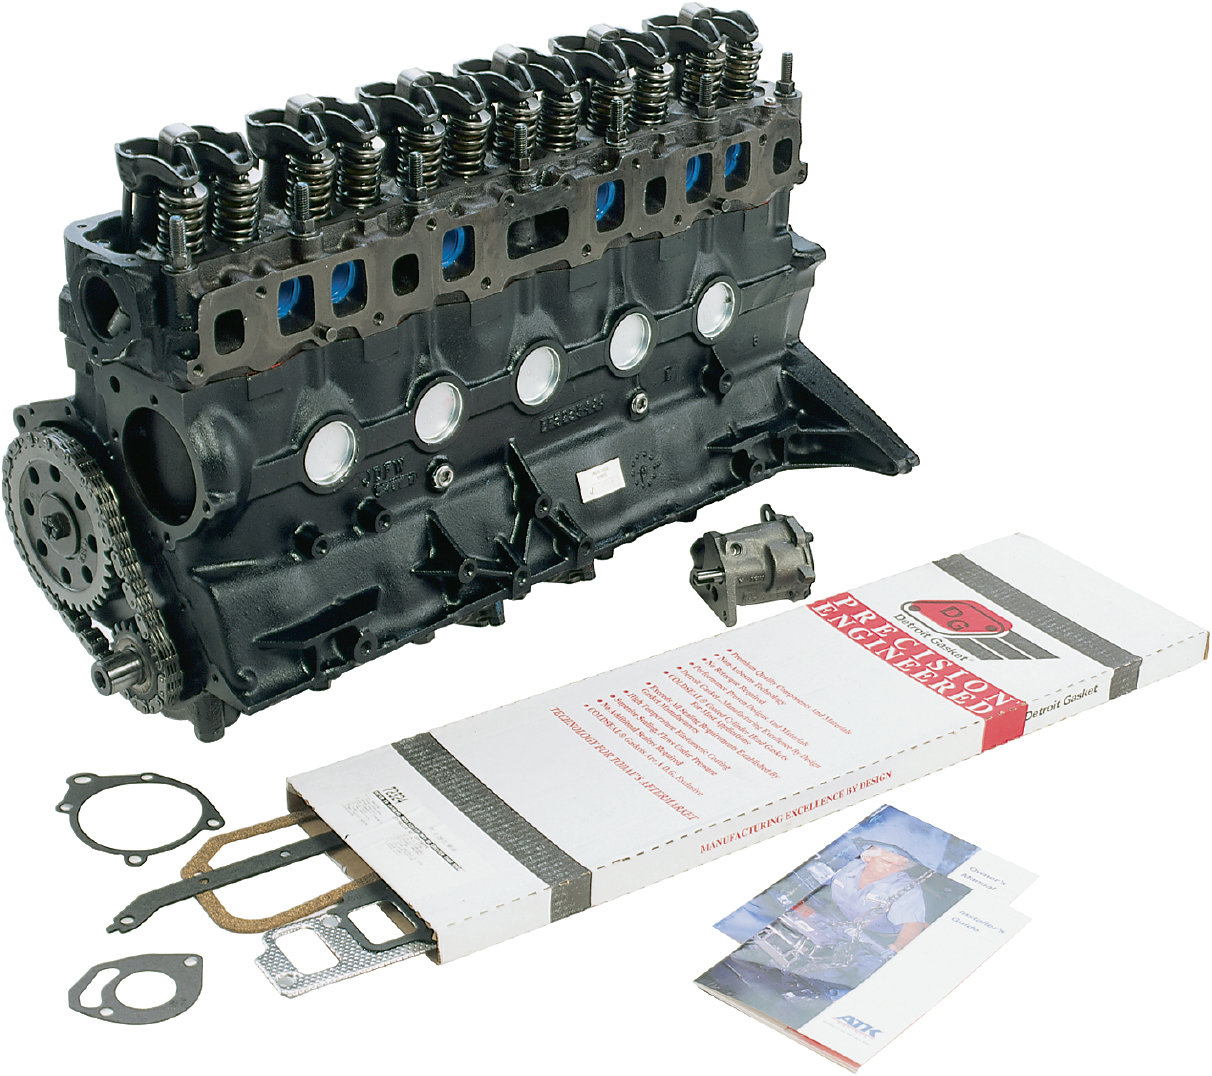 ATK Engines Replacement  I-6 Engine for 1998 Jeep Grand Cherokee ZJ |  Quadratec